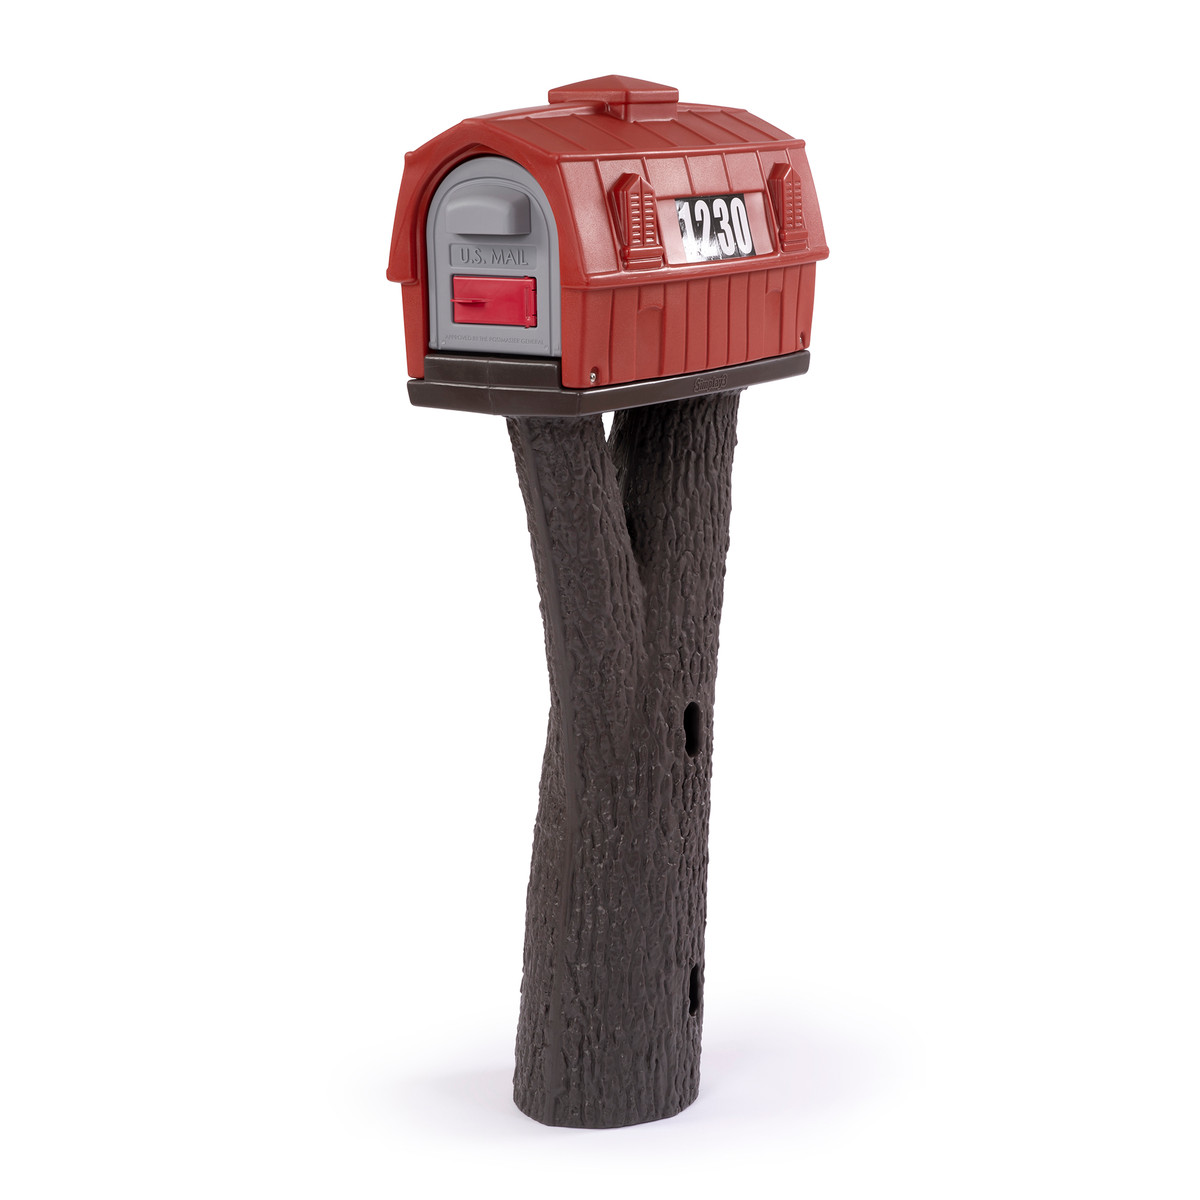 Simplay3 Rustic Barn Mailbox has a red barn mailbox and tree trunk design heavy duty base